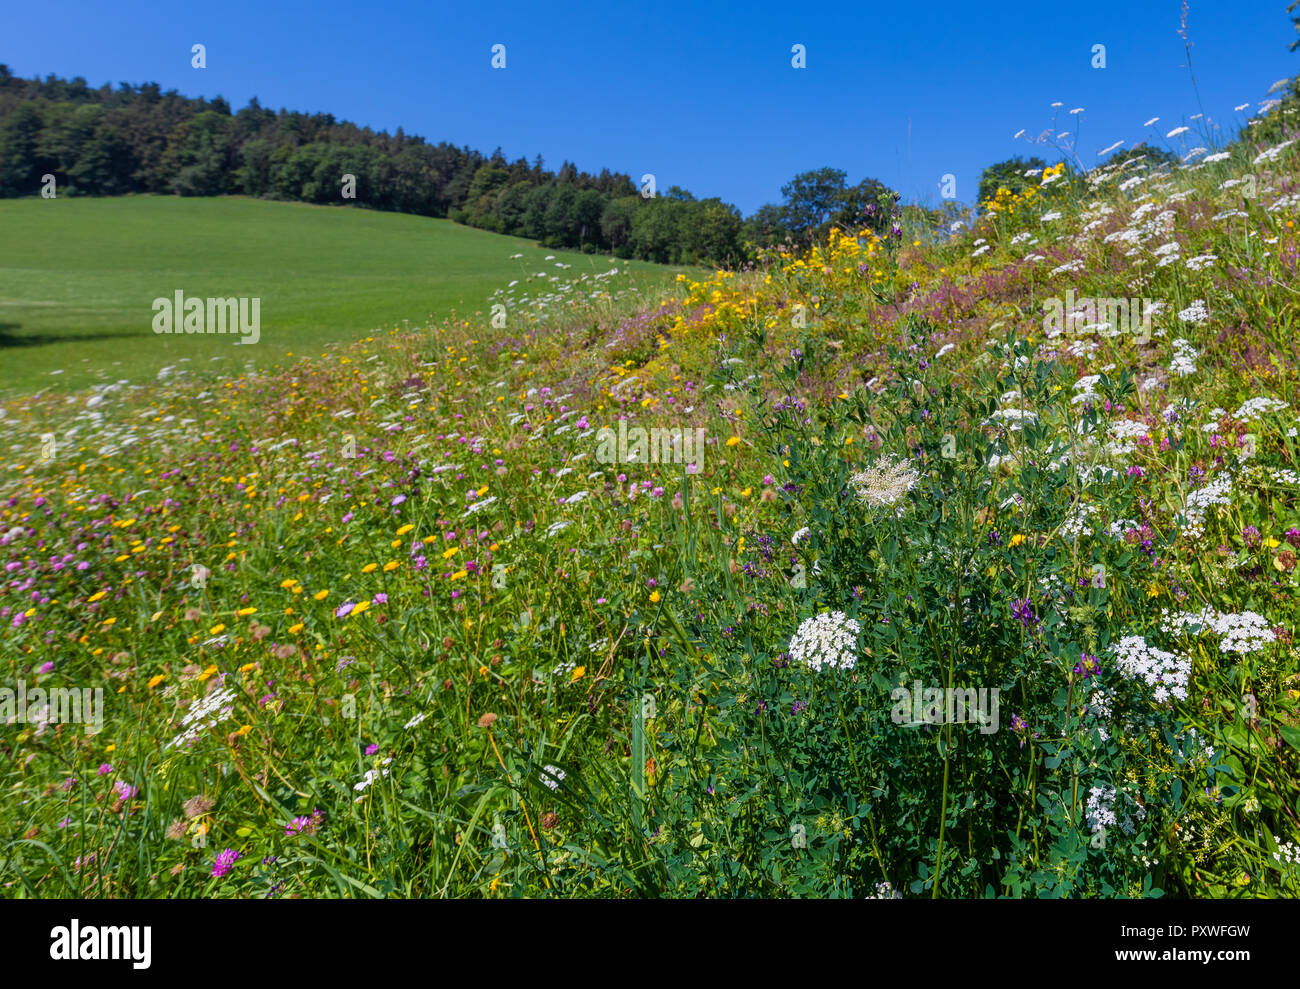 Color outdoor nature close up  of wild carrot / daucus carota and other wildflowers on natural blurred hilly landscape background,sunny summer day Stock Photo